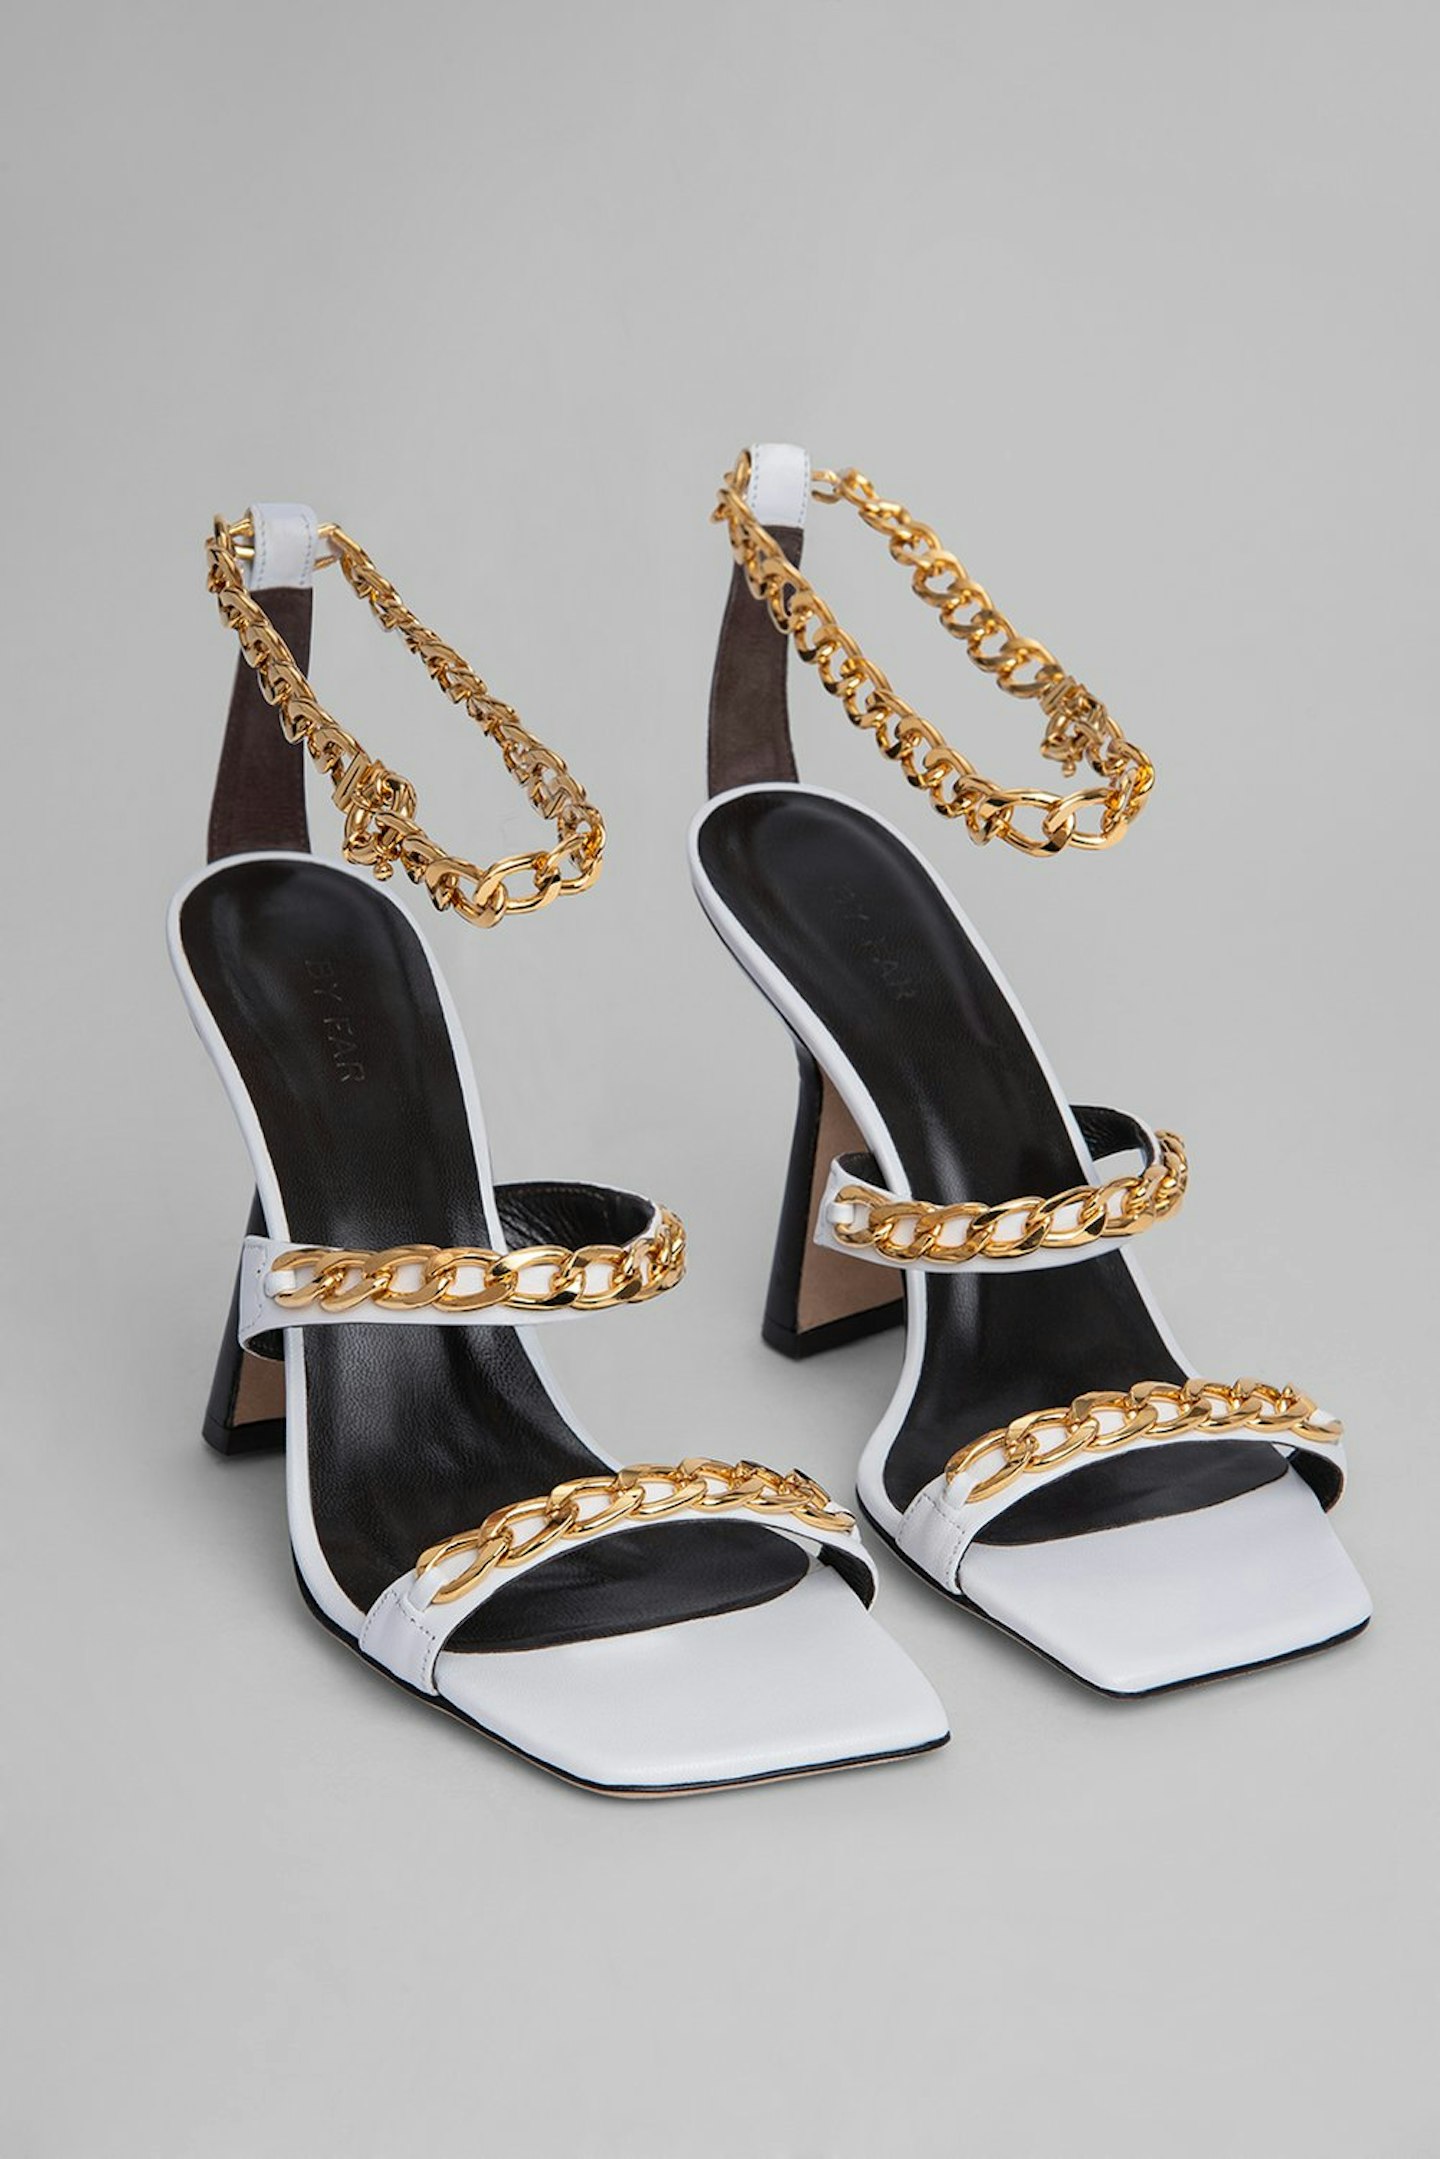 By Far, Gina White Nappa Leather Sandals, £405